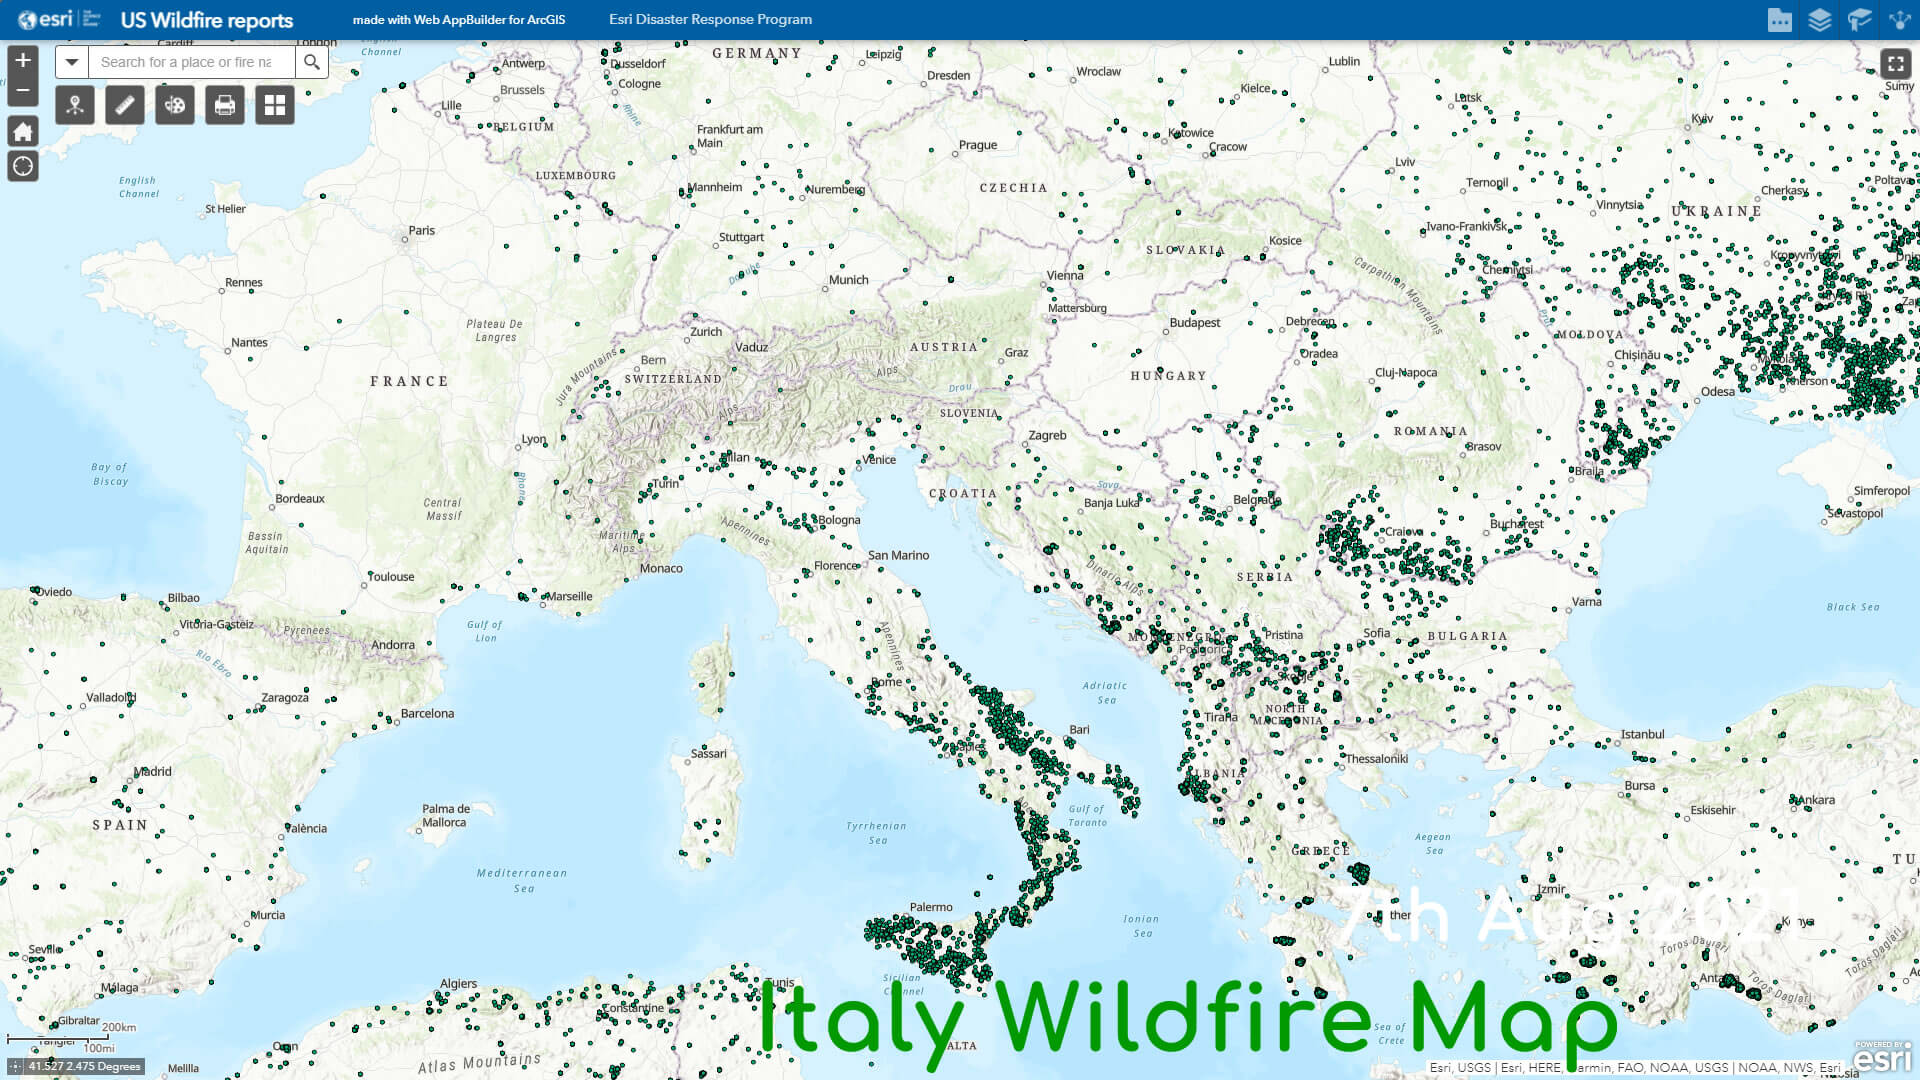 Italy Wildfire Map